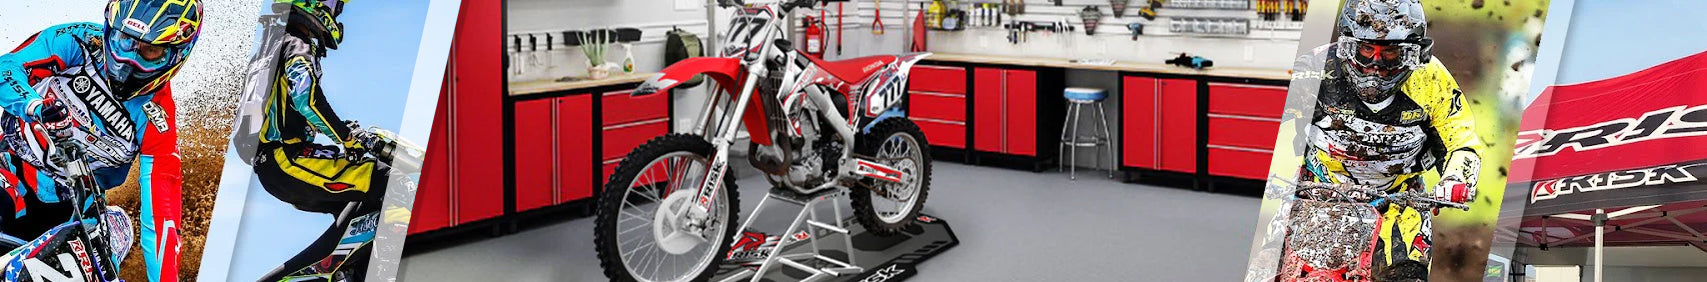 moto garage collection banner featuring moto collage with a dirt bike sitting on a Ride-on-lift and pit mat in a garage setting